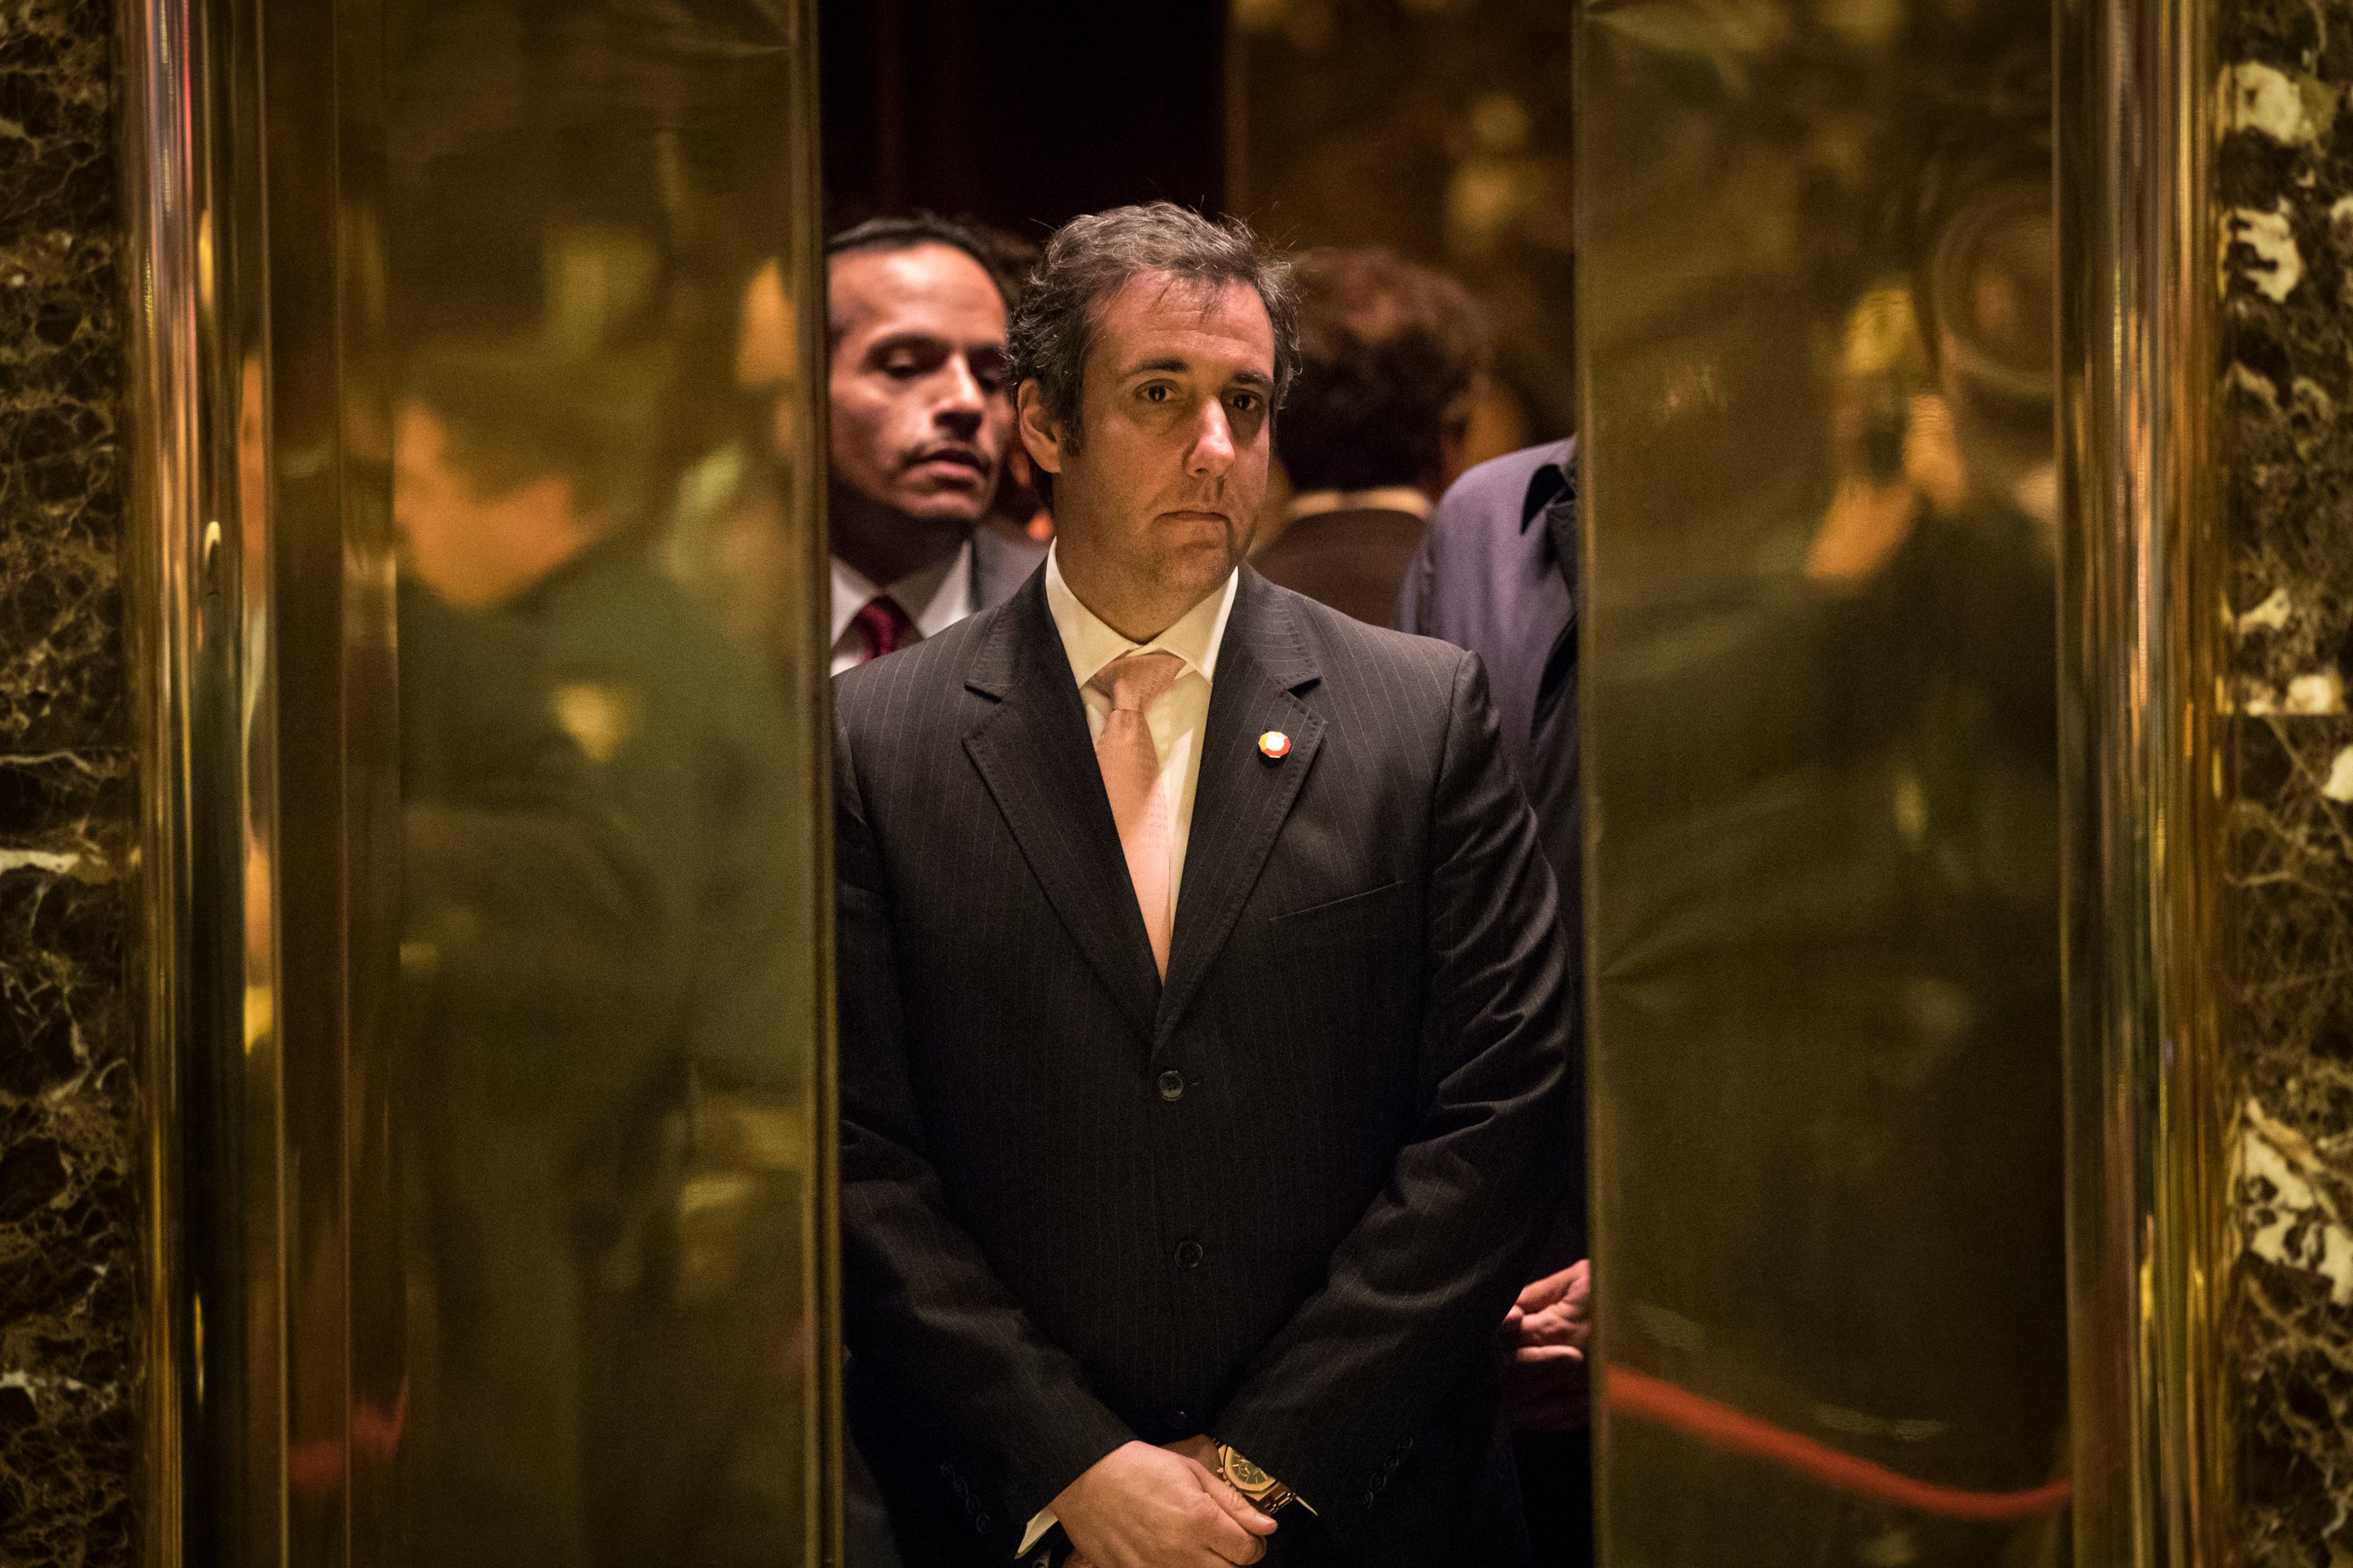 Michael Cohen, personal lawyer for President-elect Donald Trump, gets into an elevator at Trump Tower, Dec. 12, 2016 in New York City. (Drew Angerer&mdash;Getty Images)